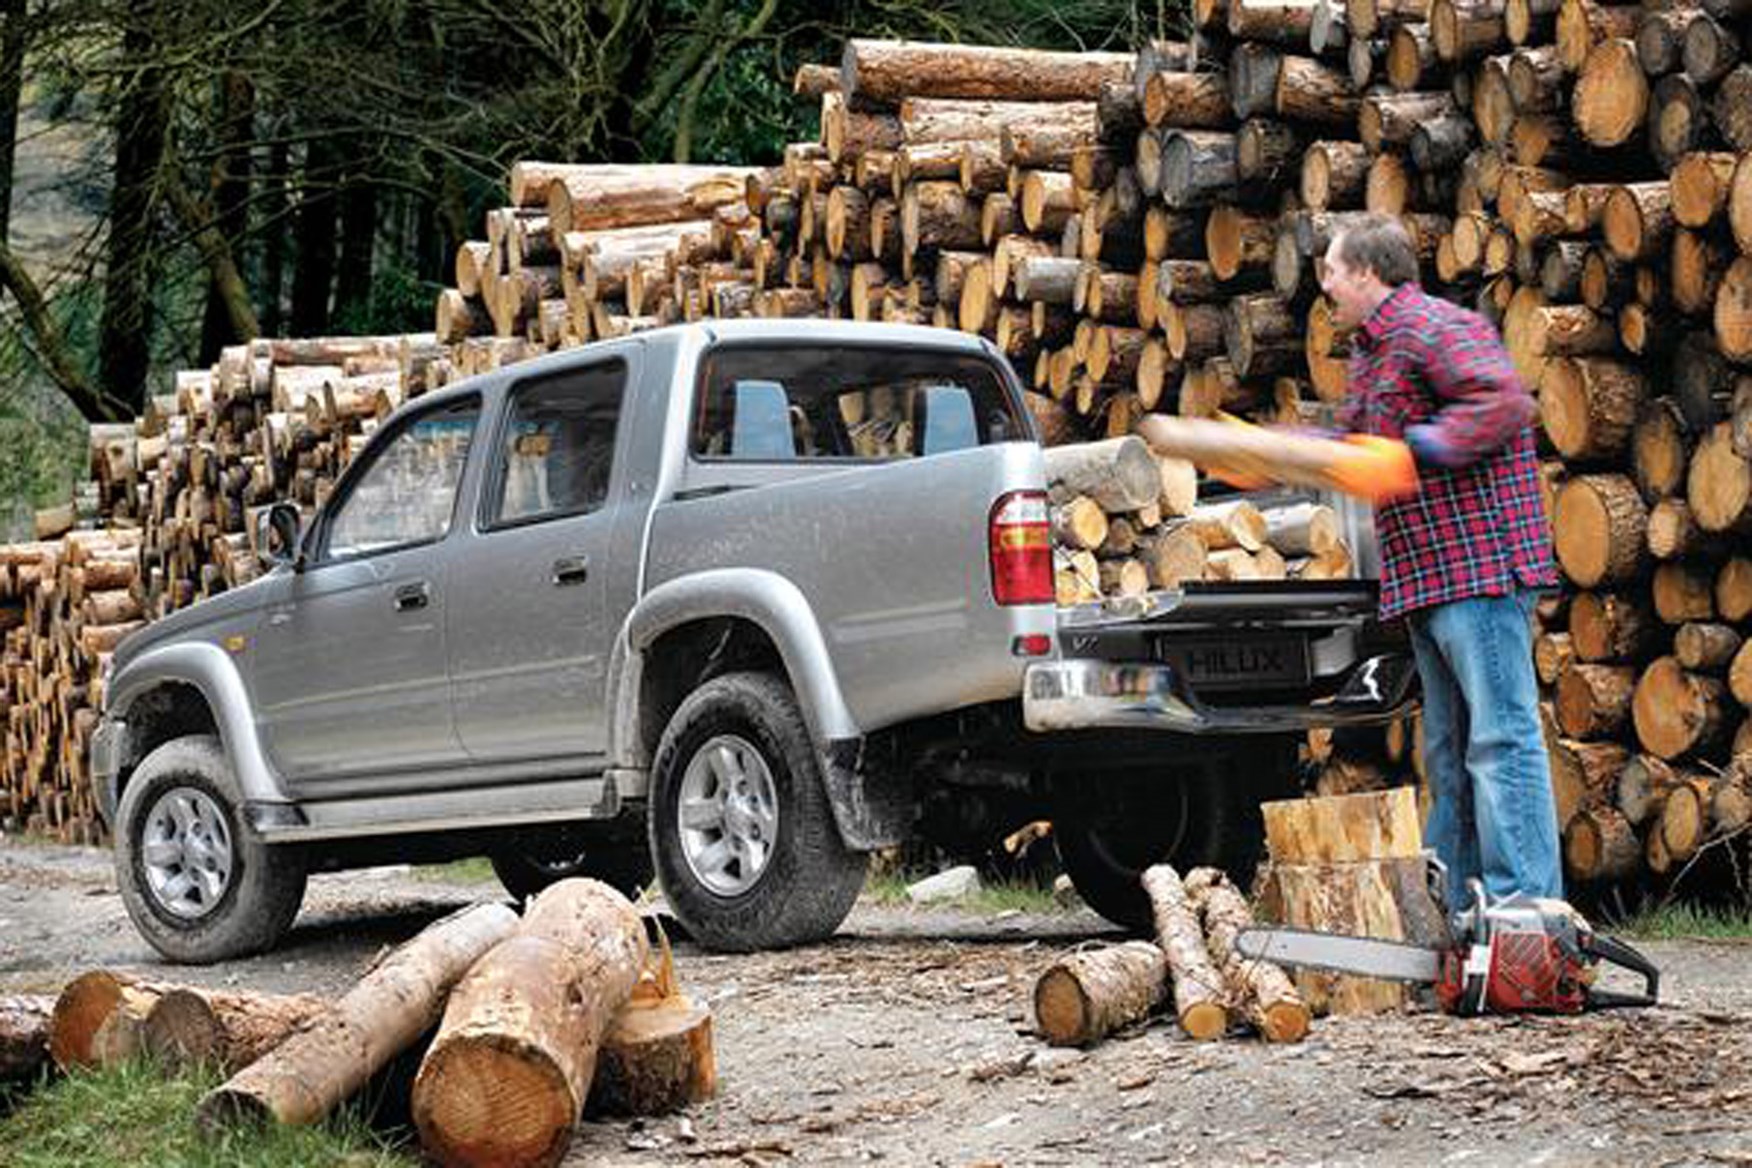 Toyota Hilux review on Parkers Vans - load area